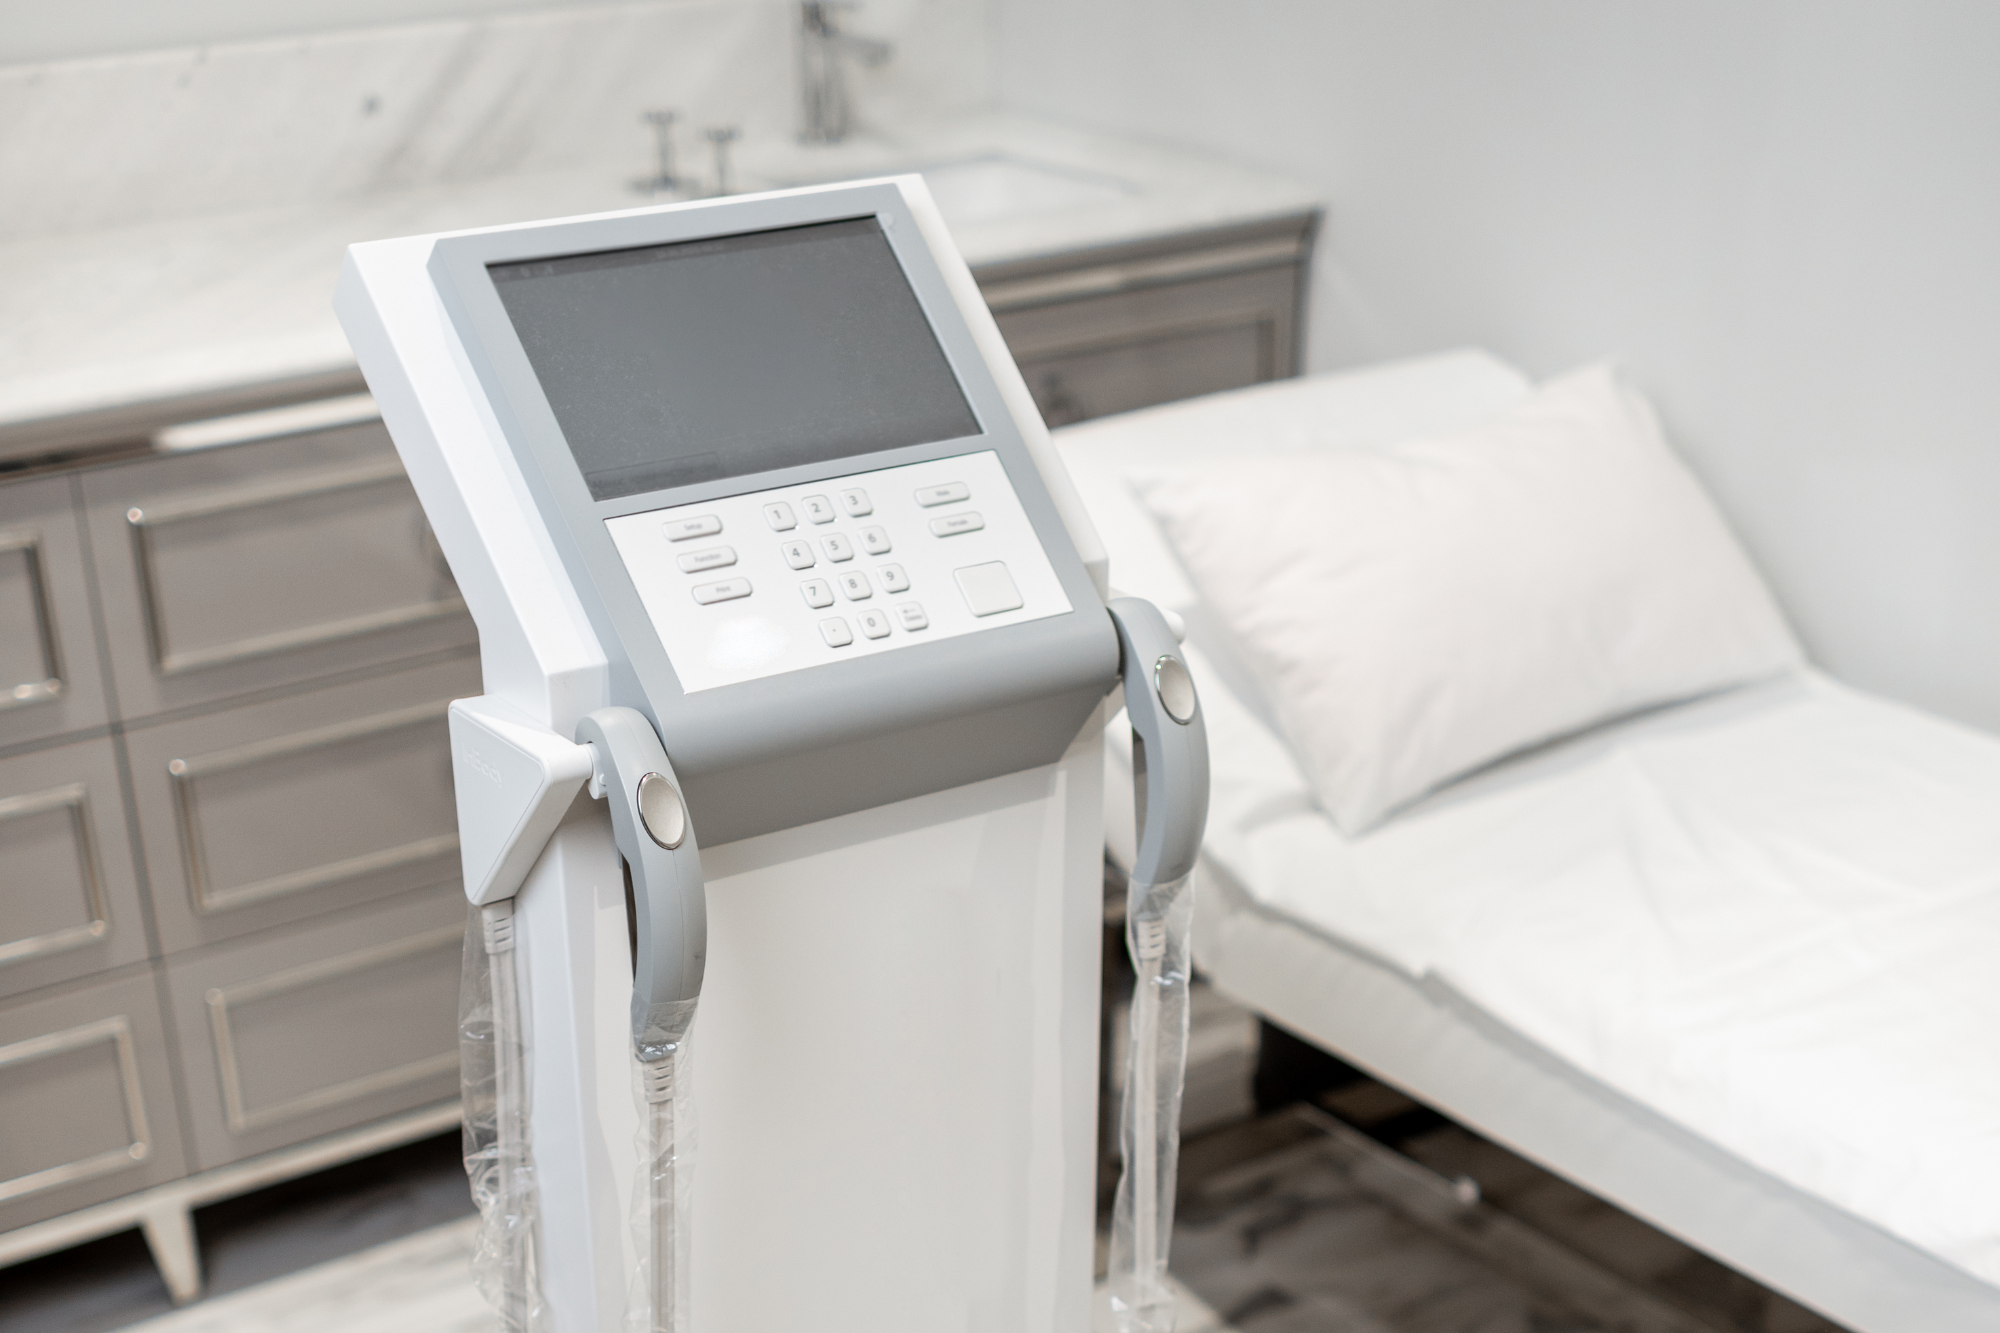 What is an InBody scan? A close-up shot shows an InBody scan device in a bright, clean exam room.